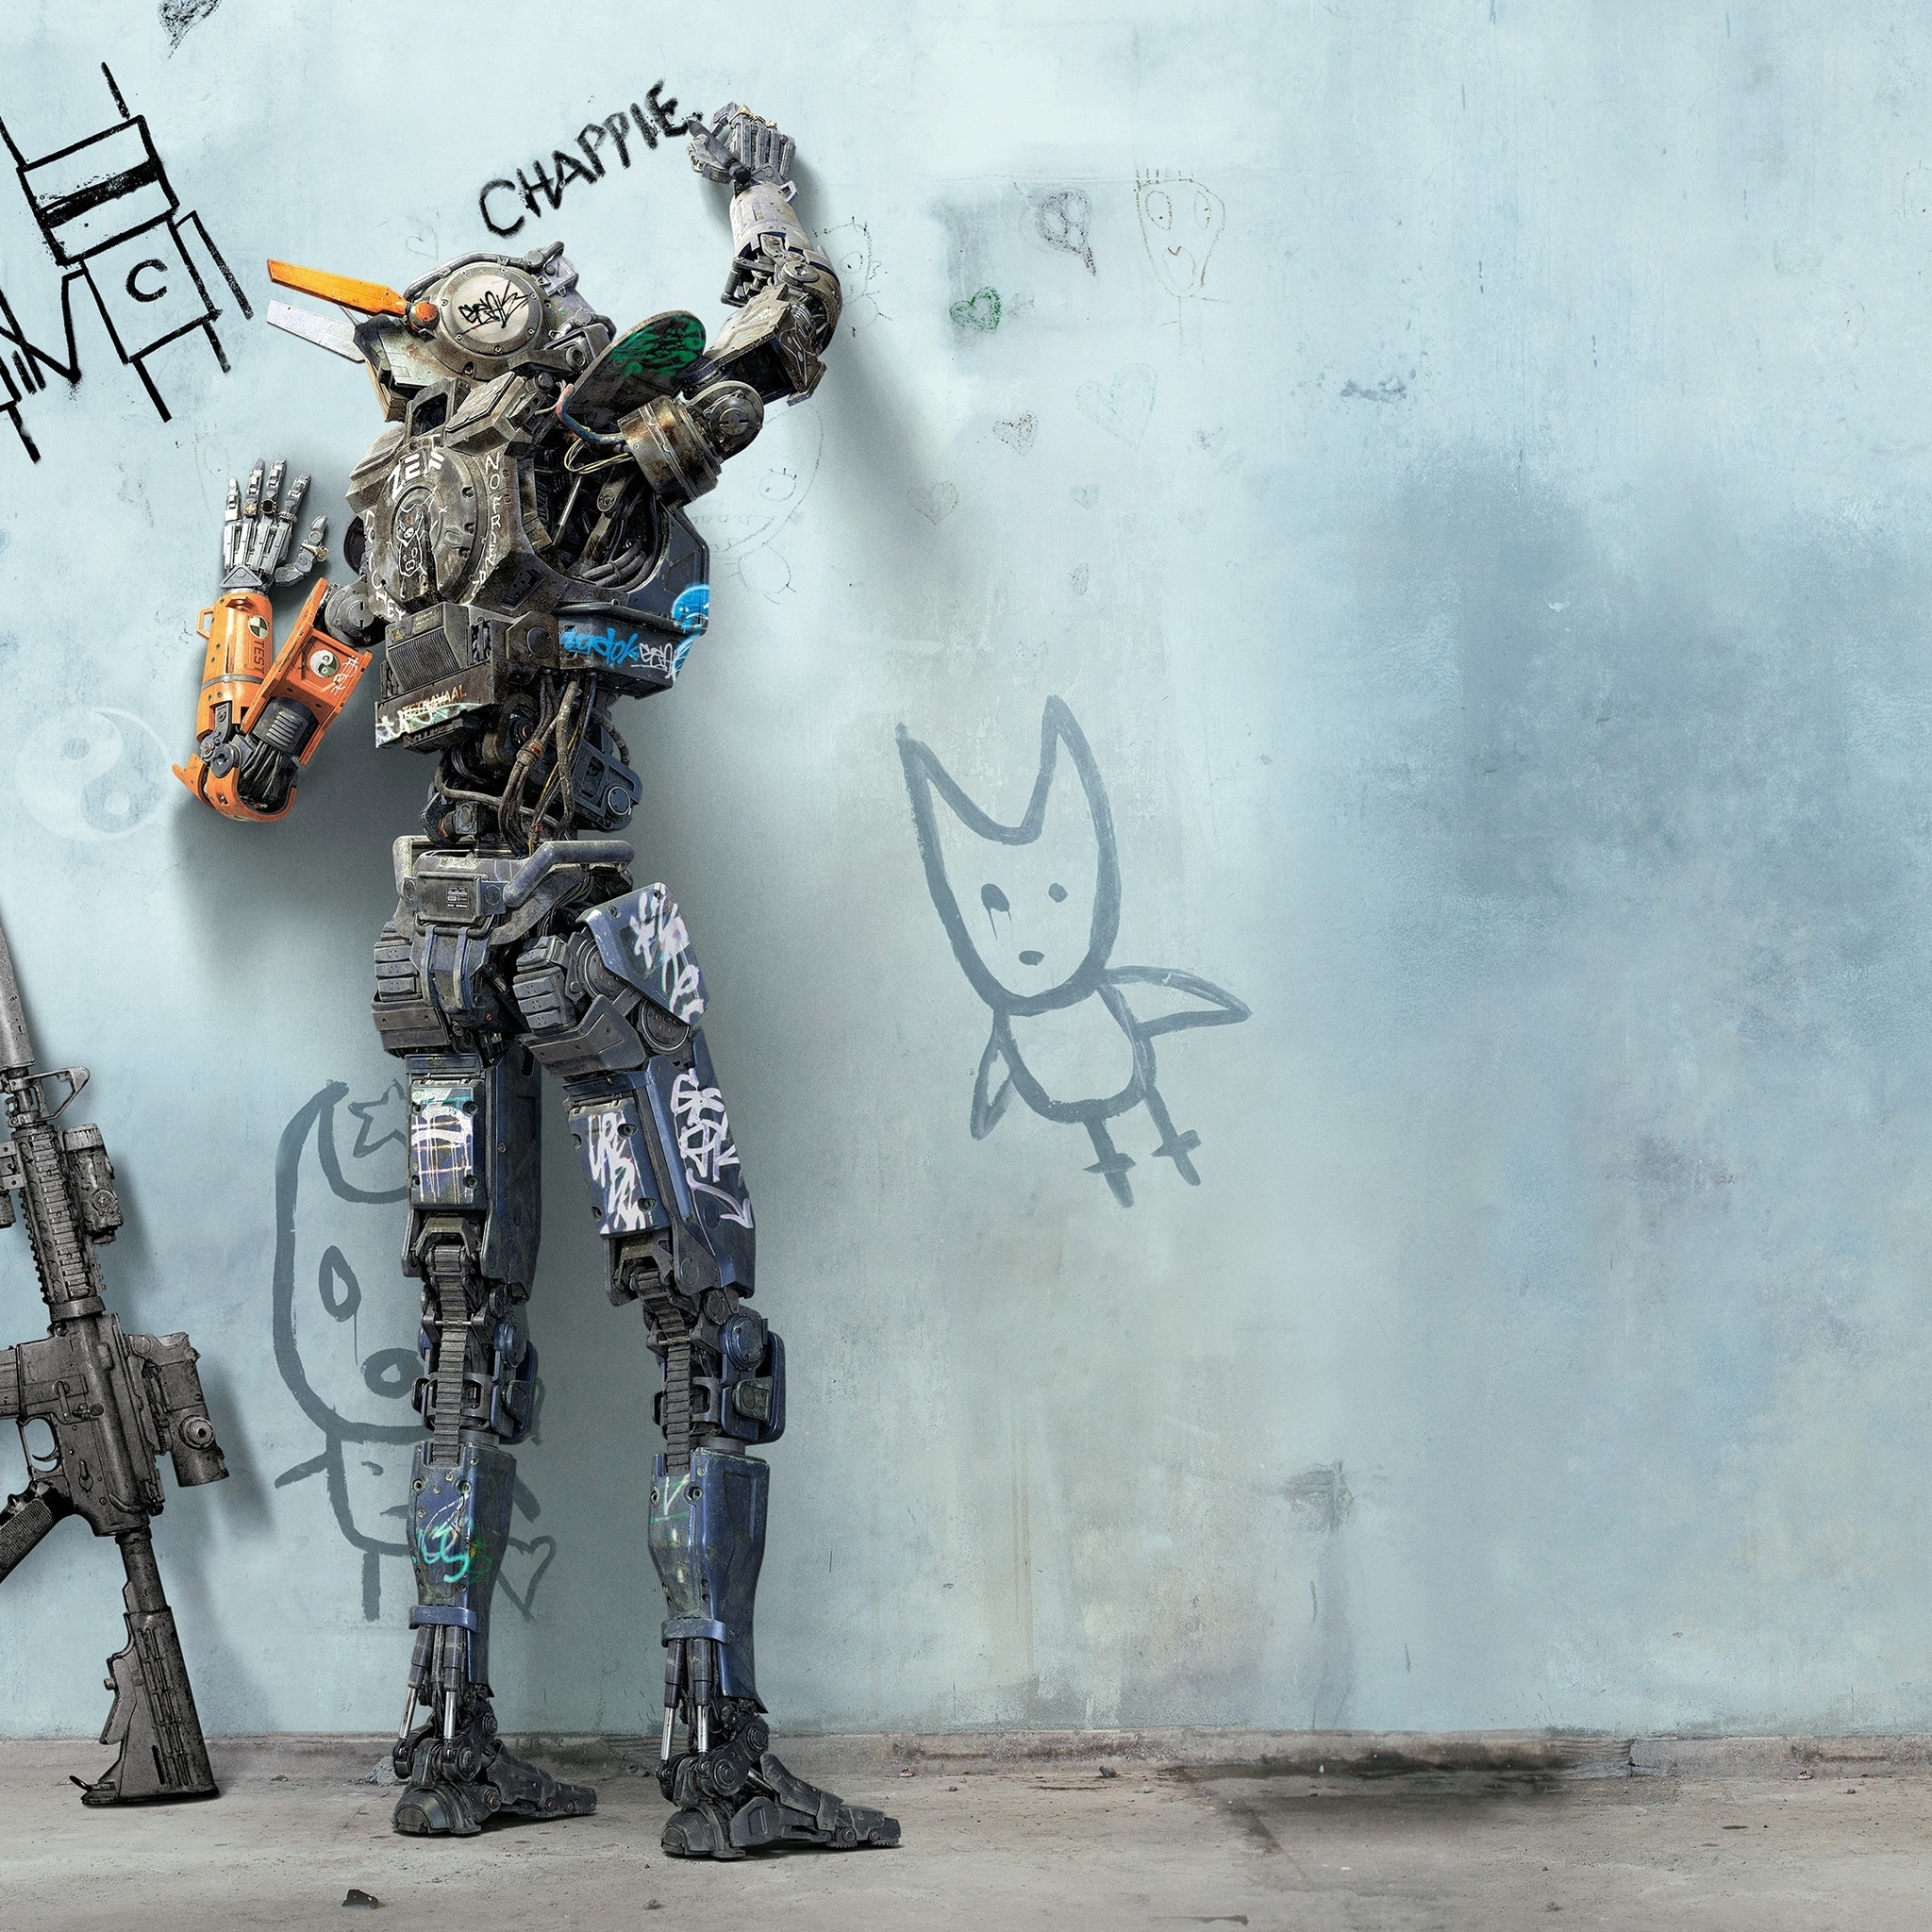 Chappie Movie 2015 for 2048 x 2048 New iPad resolution